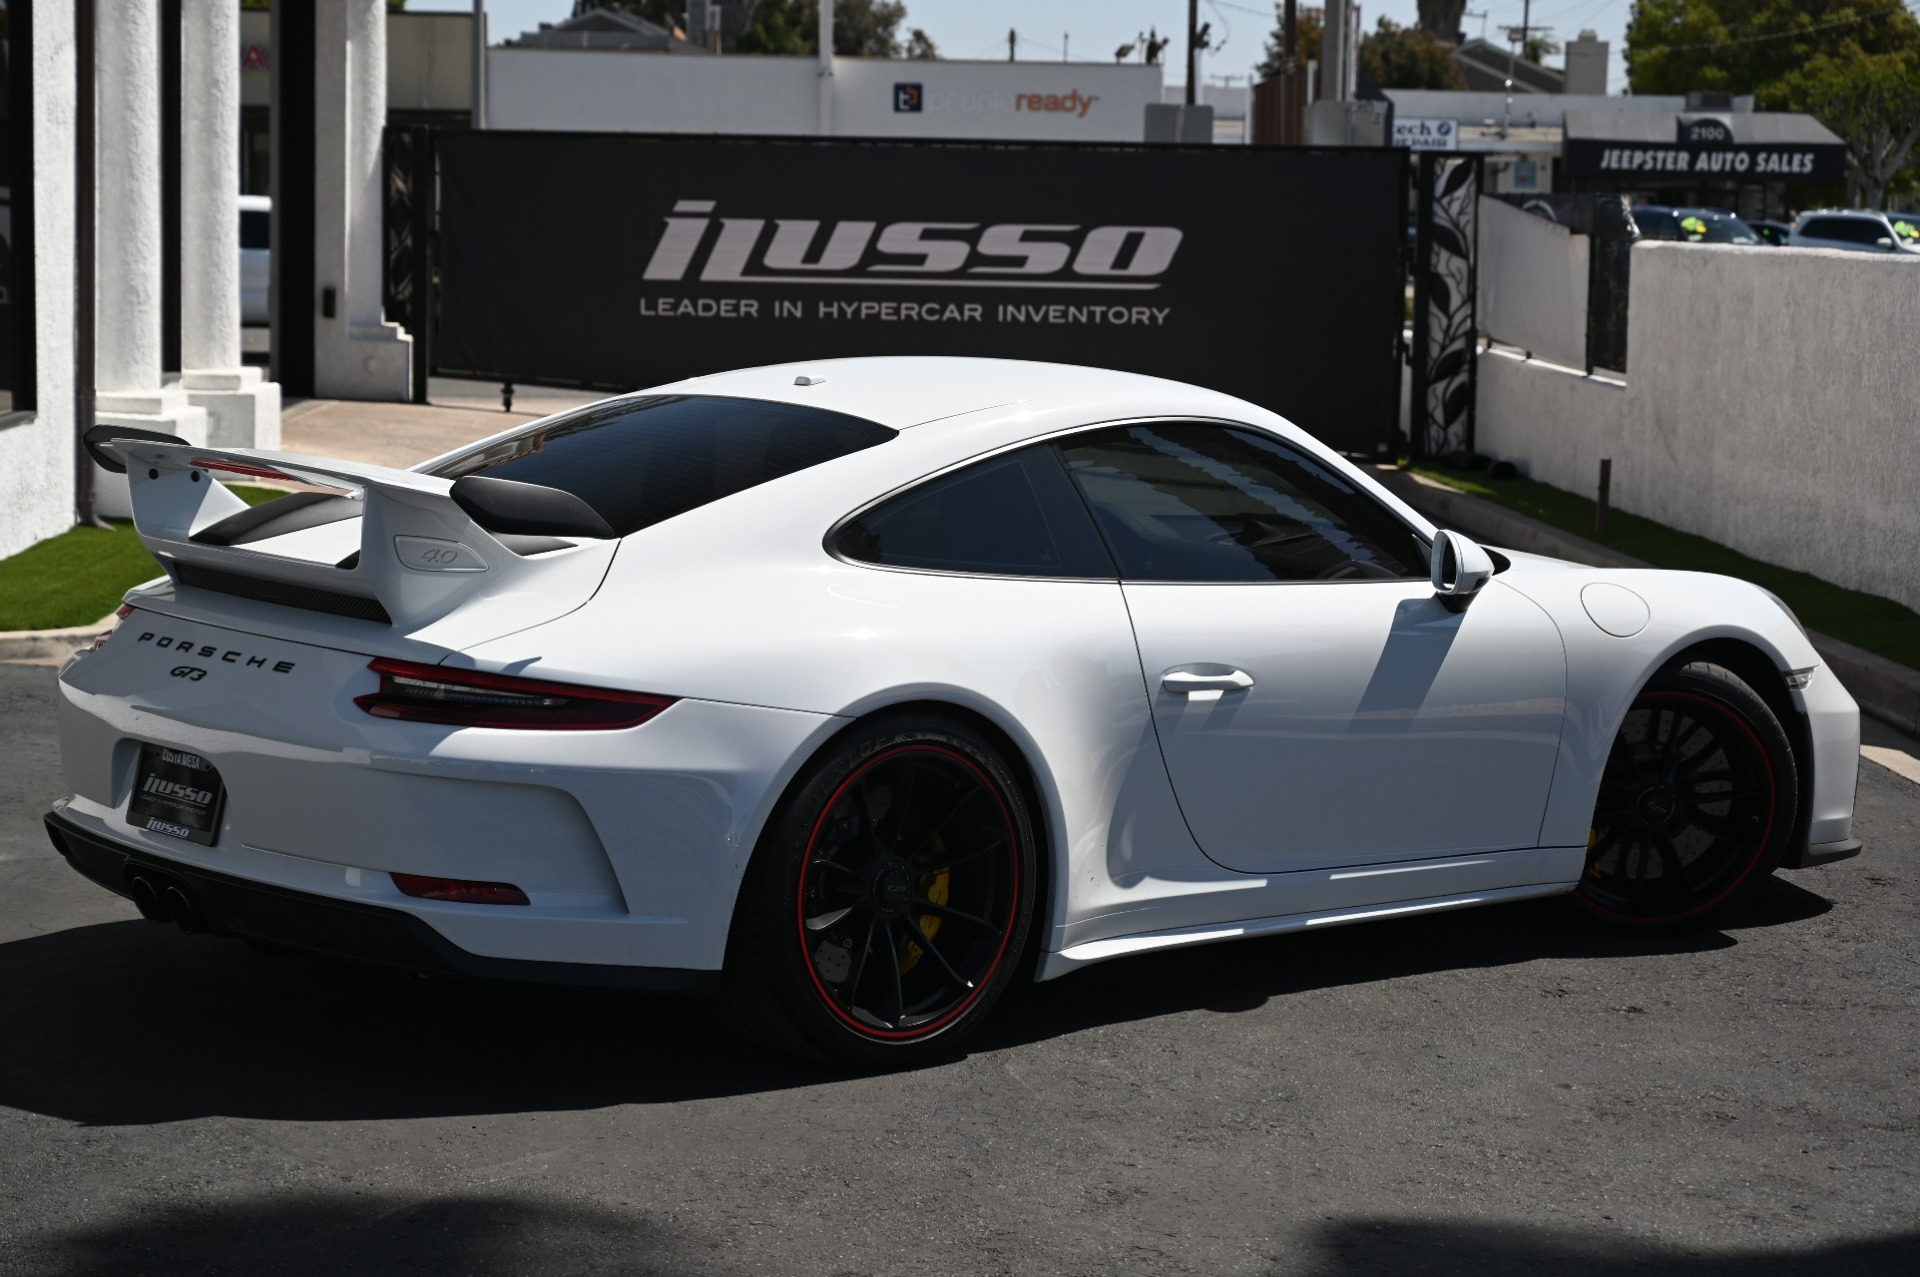 2018 Porsche 911 GT3 RS unveiled, priced from $416,500 - Drive